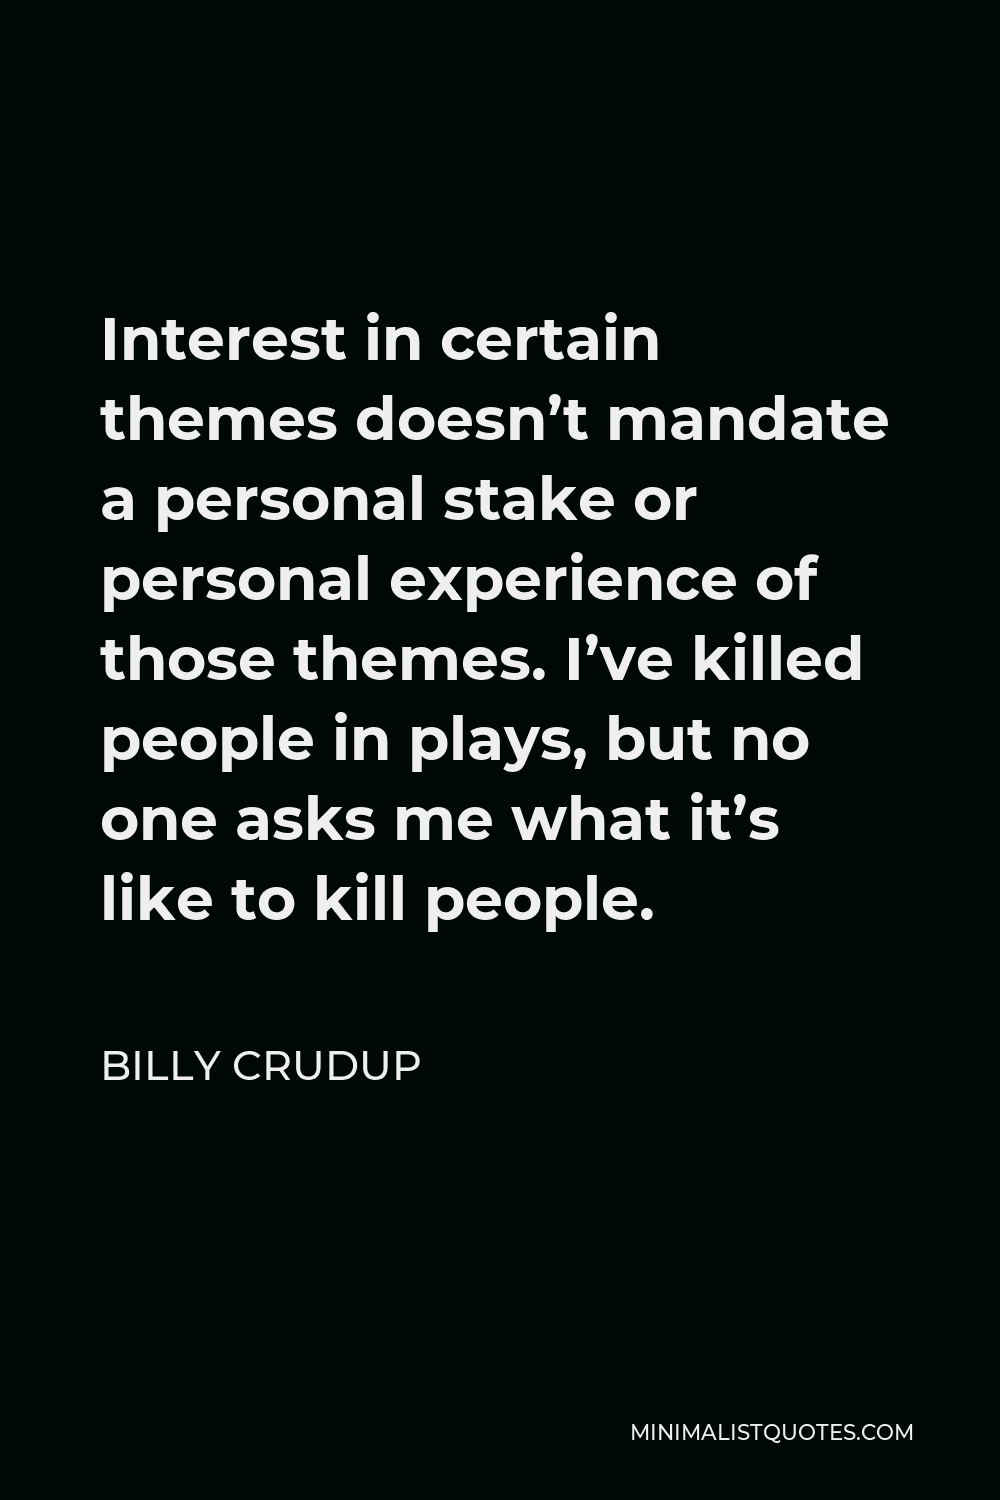 Billy Crudup Quote - Interest in certain themes doesn’t mandate a personal stake or personal experience of those themes. I’ve killed people in plays, but no one asks me what it’s like to kill people.